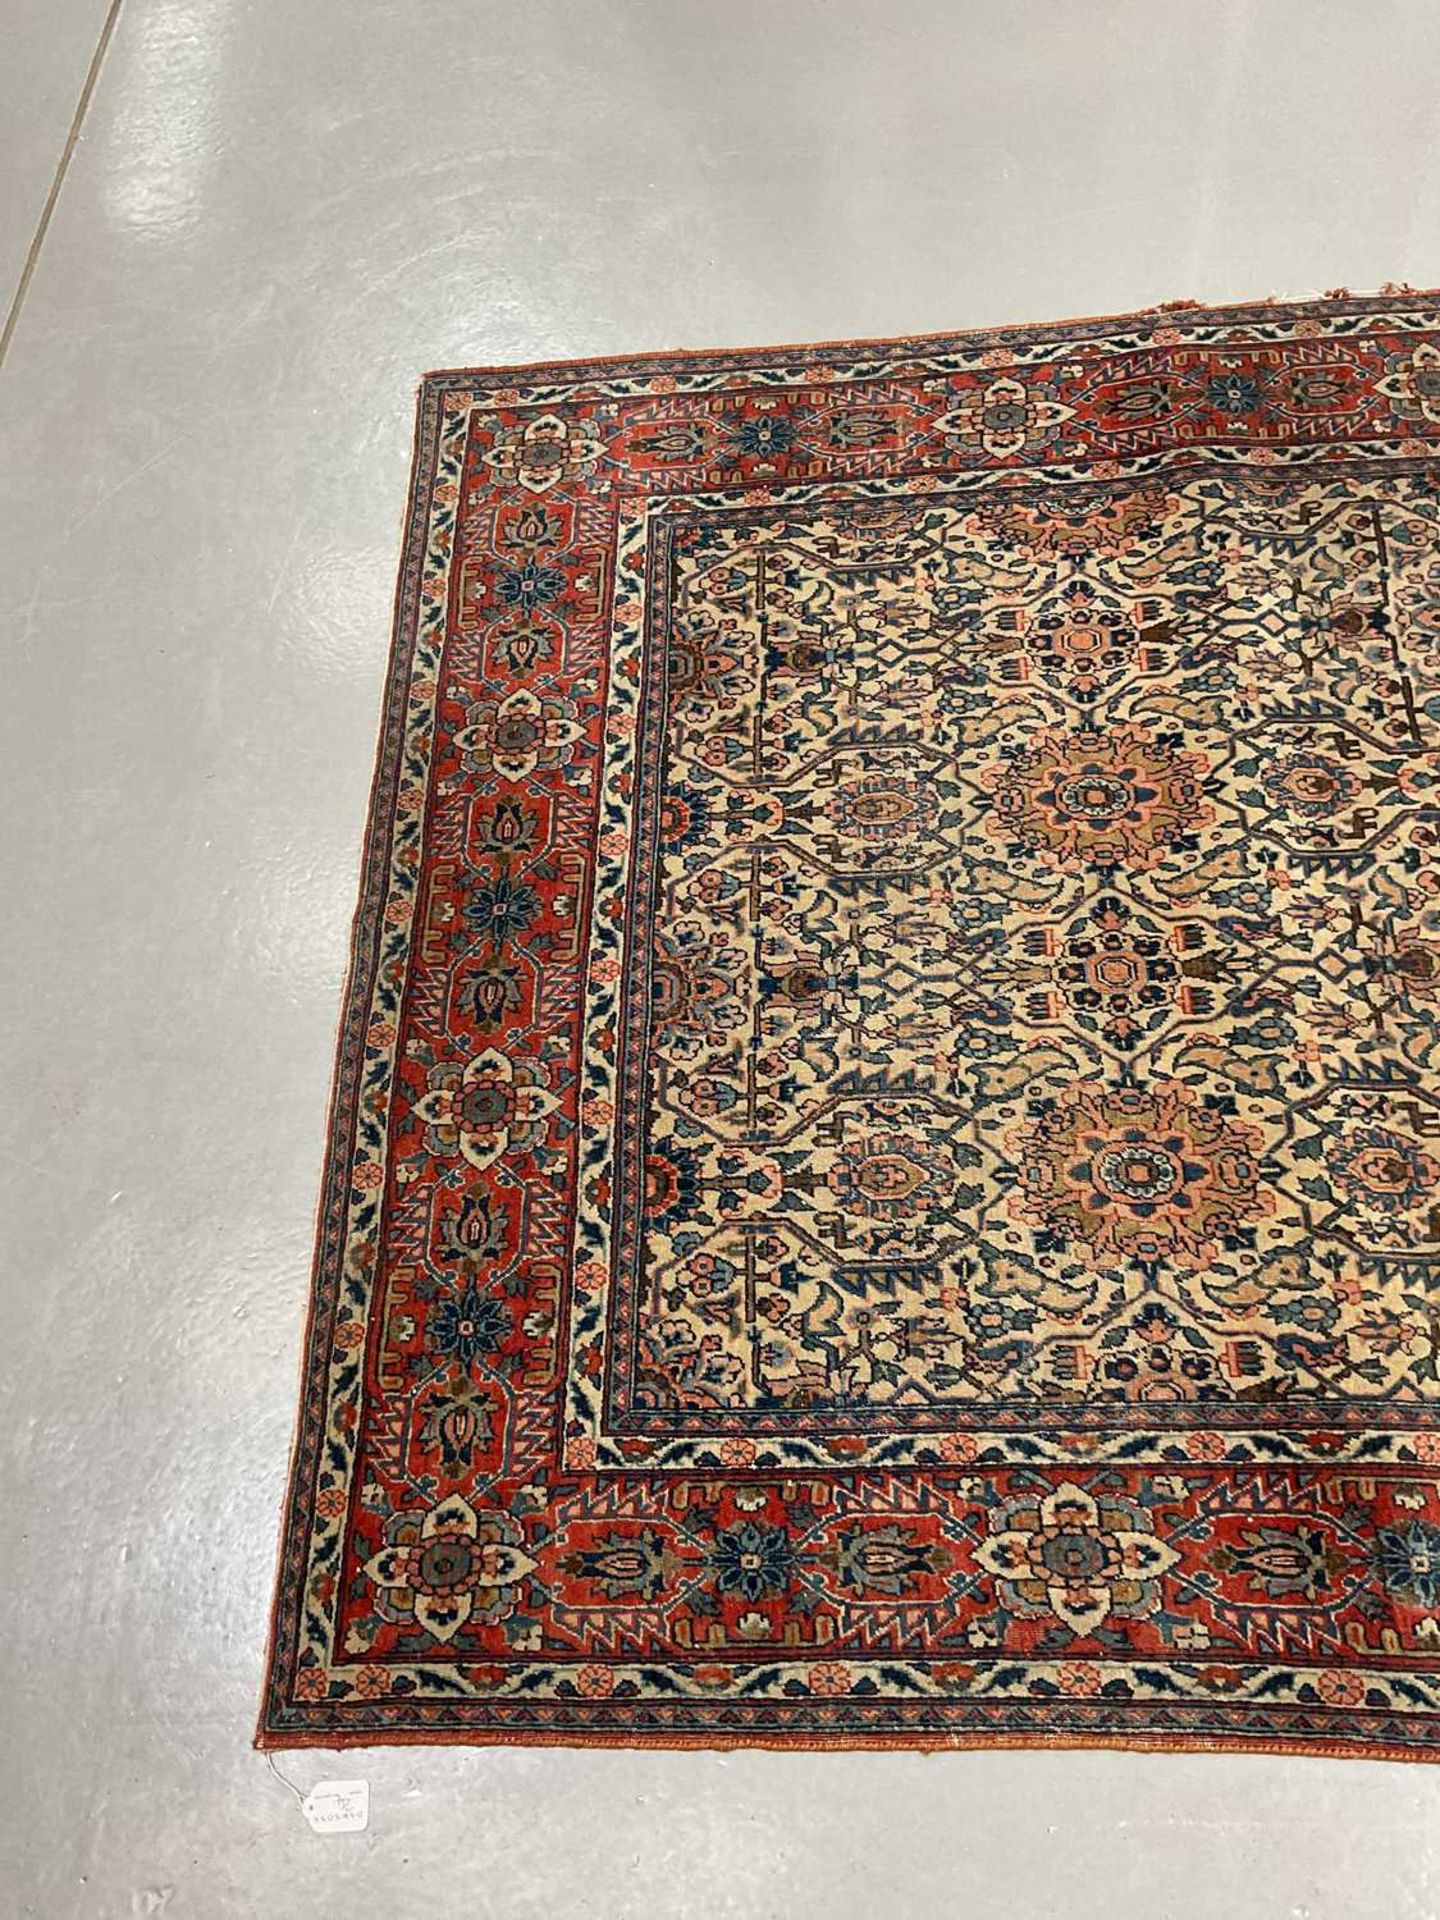 An antique ivory ground Kerman rug with an allover floral design within multiple borders 202 x 137cm - Image 7 of 10